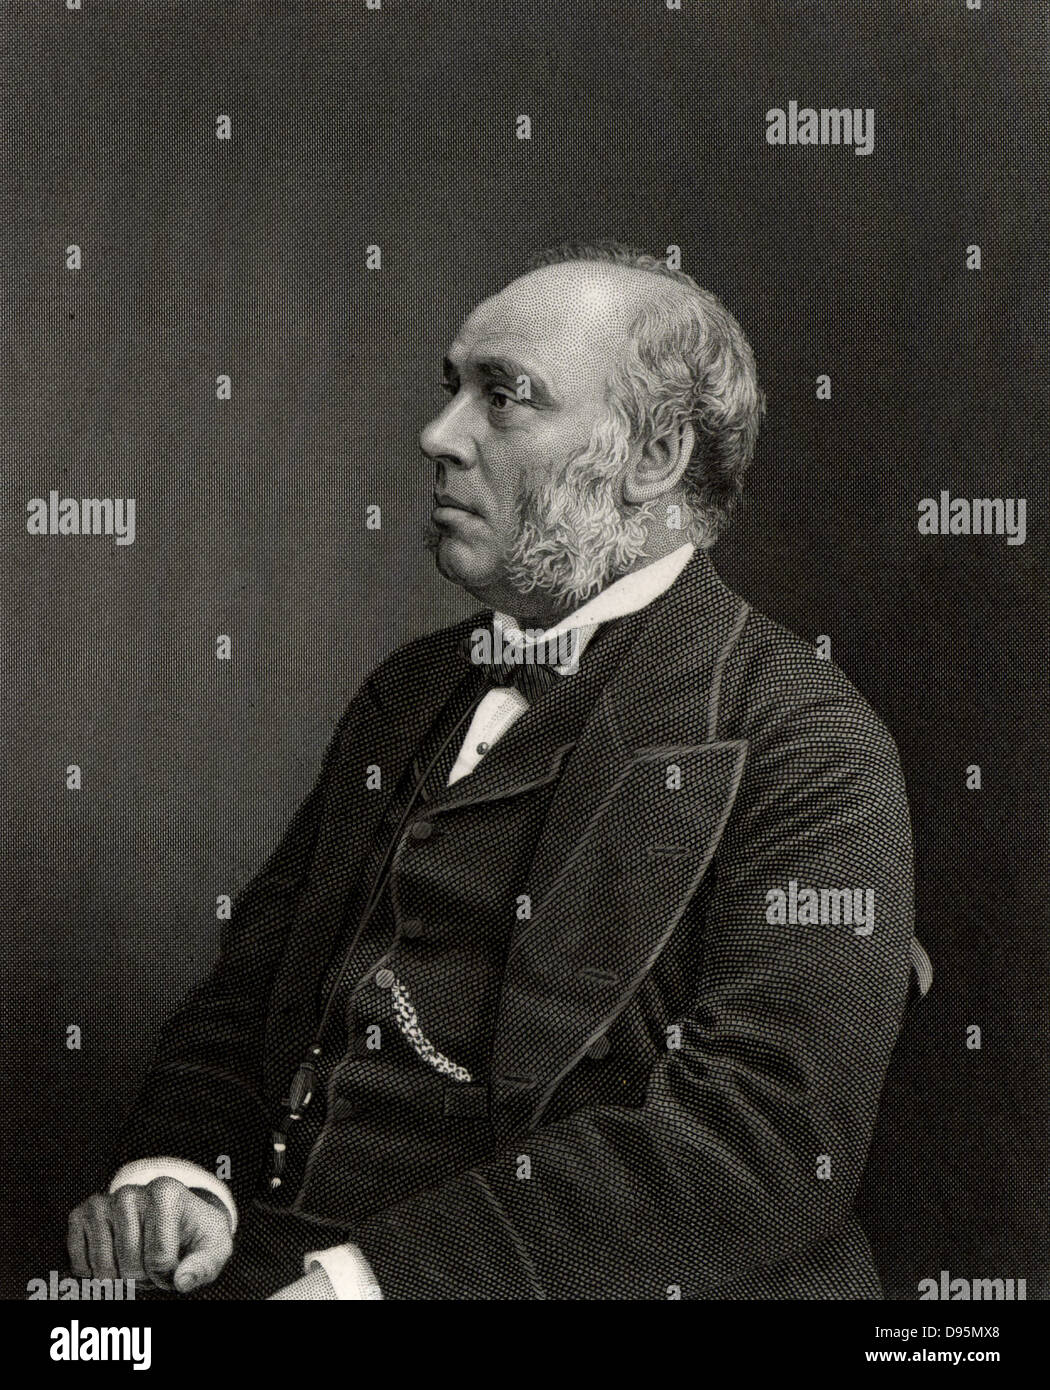 William Henry Smith (1825-1891), son of William Henry Smith (1792-1865), English businessman and politician. He joined his Stock Photo